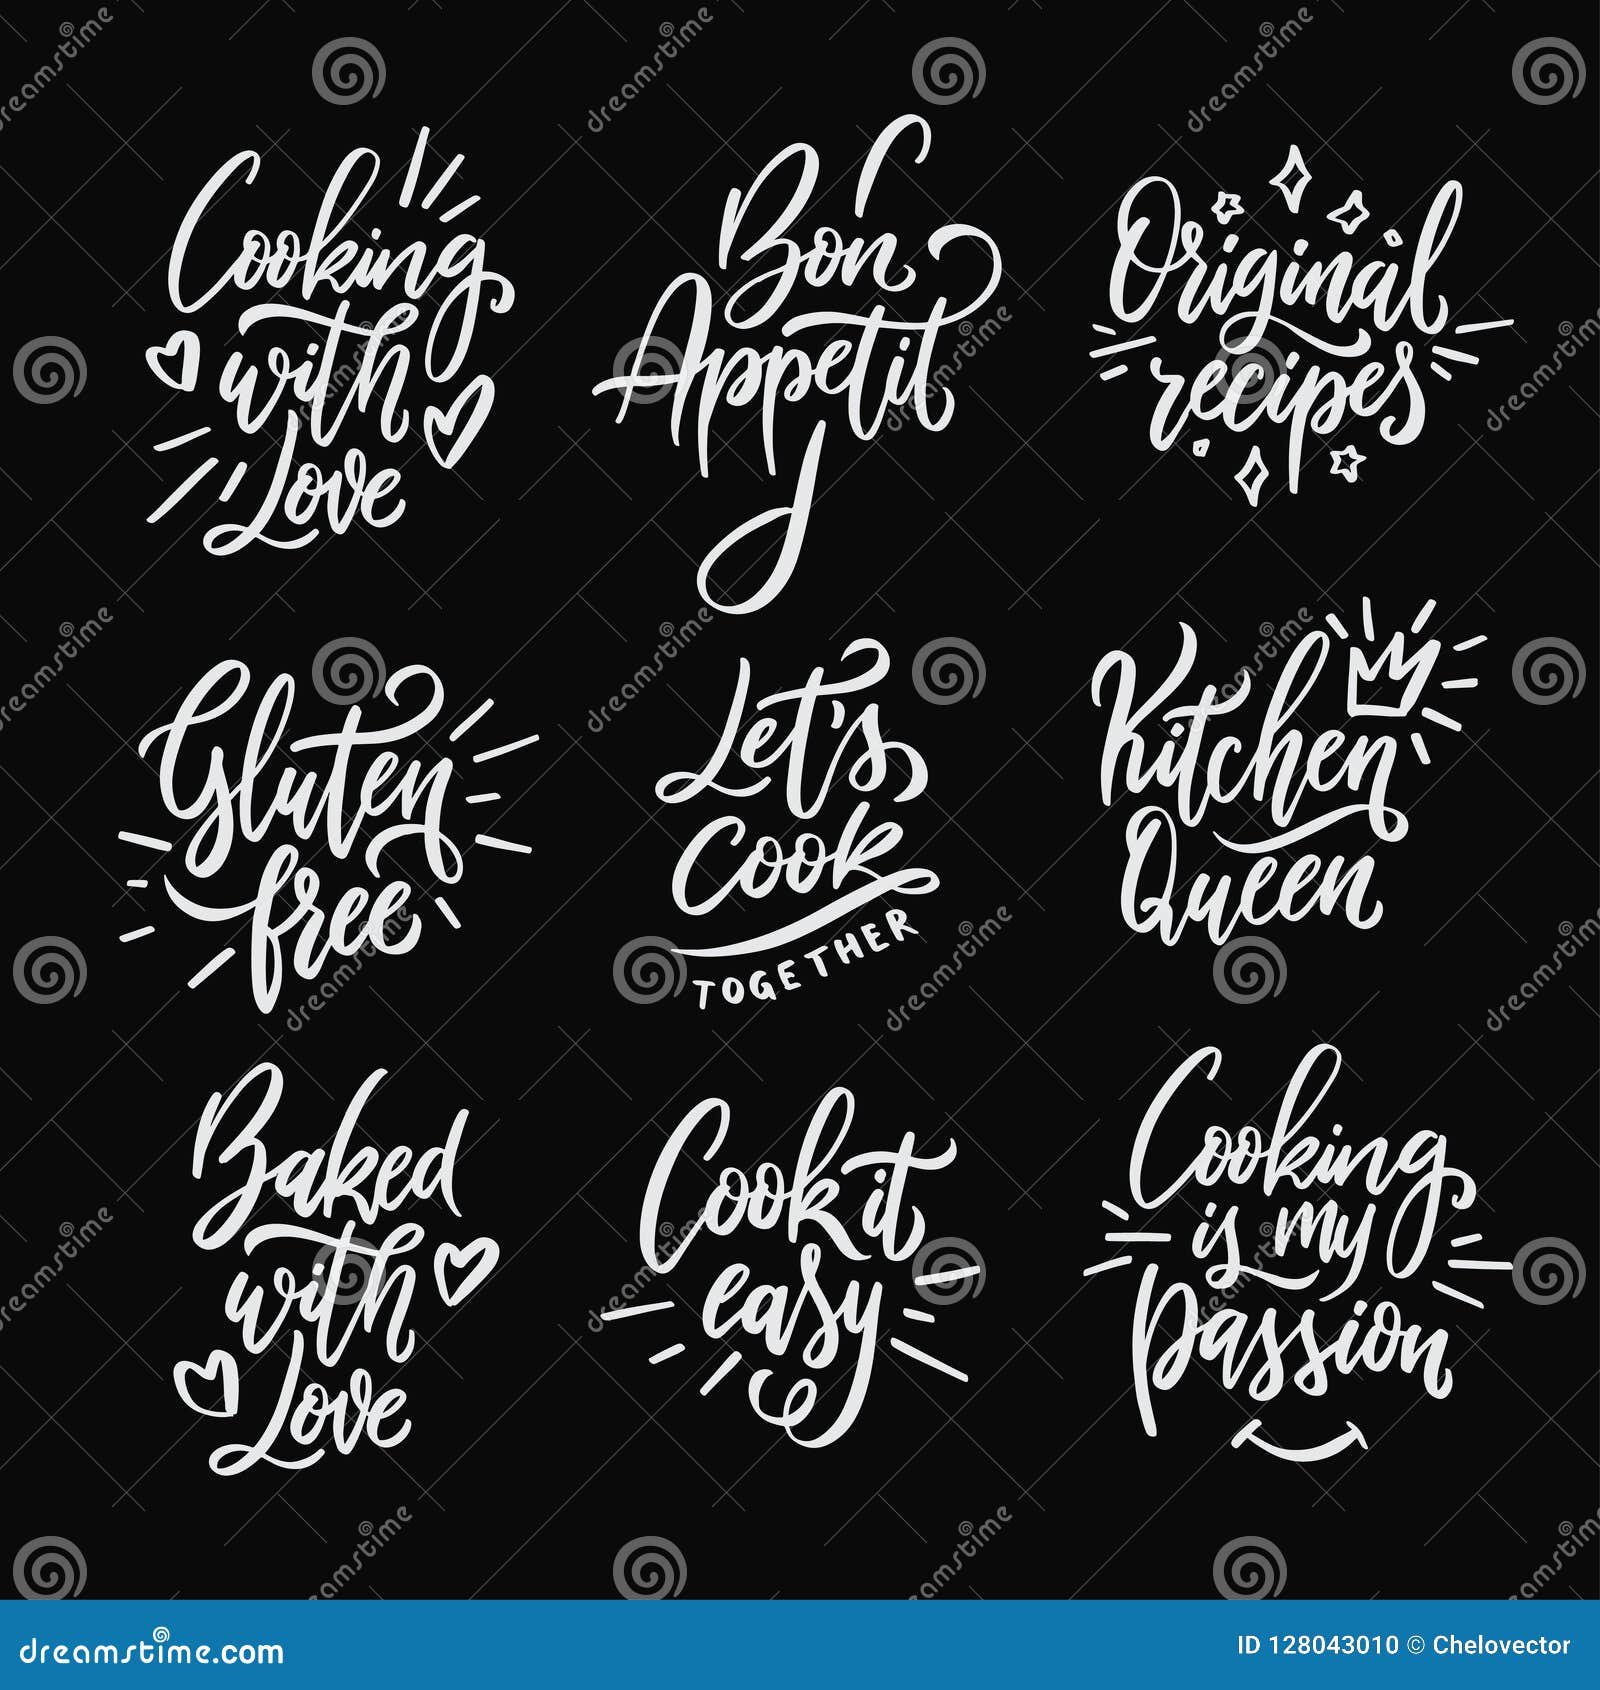 Cooking Related Quotes Collection. Vector Illustration ...